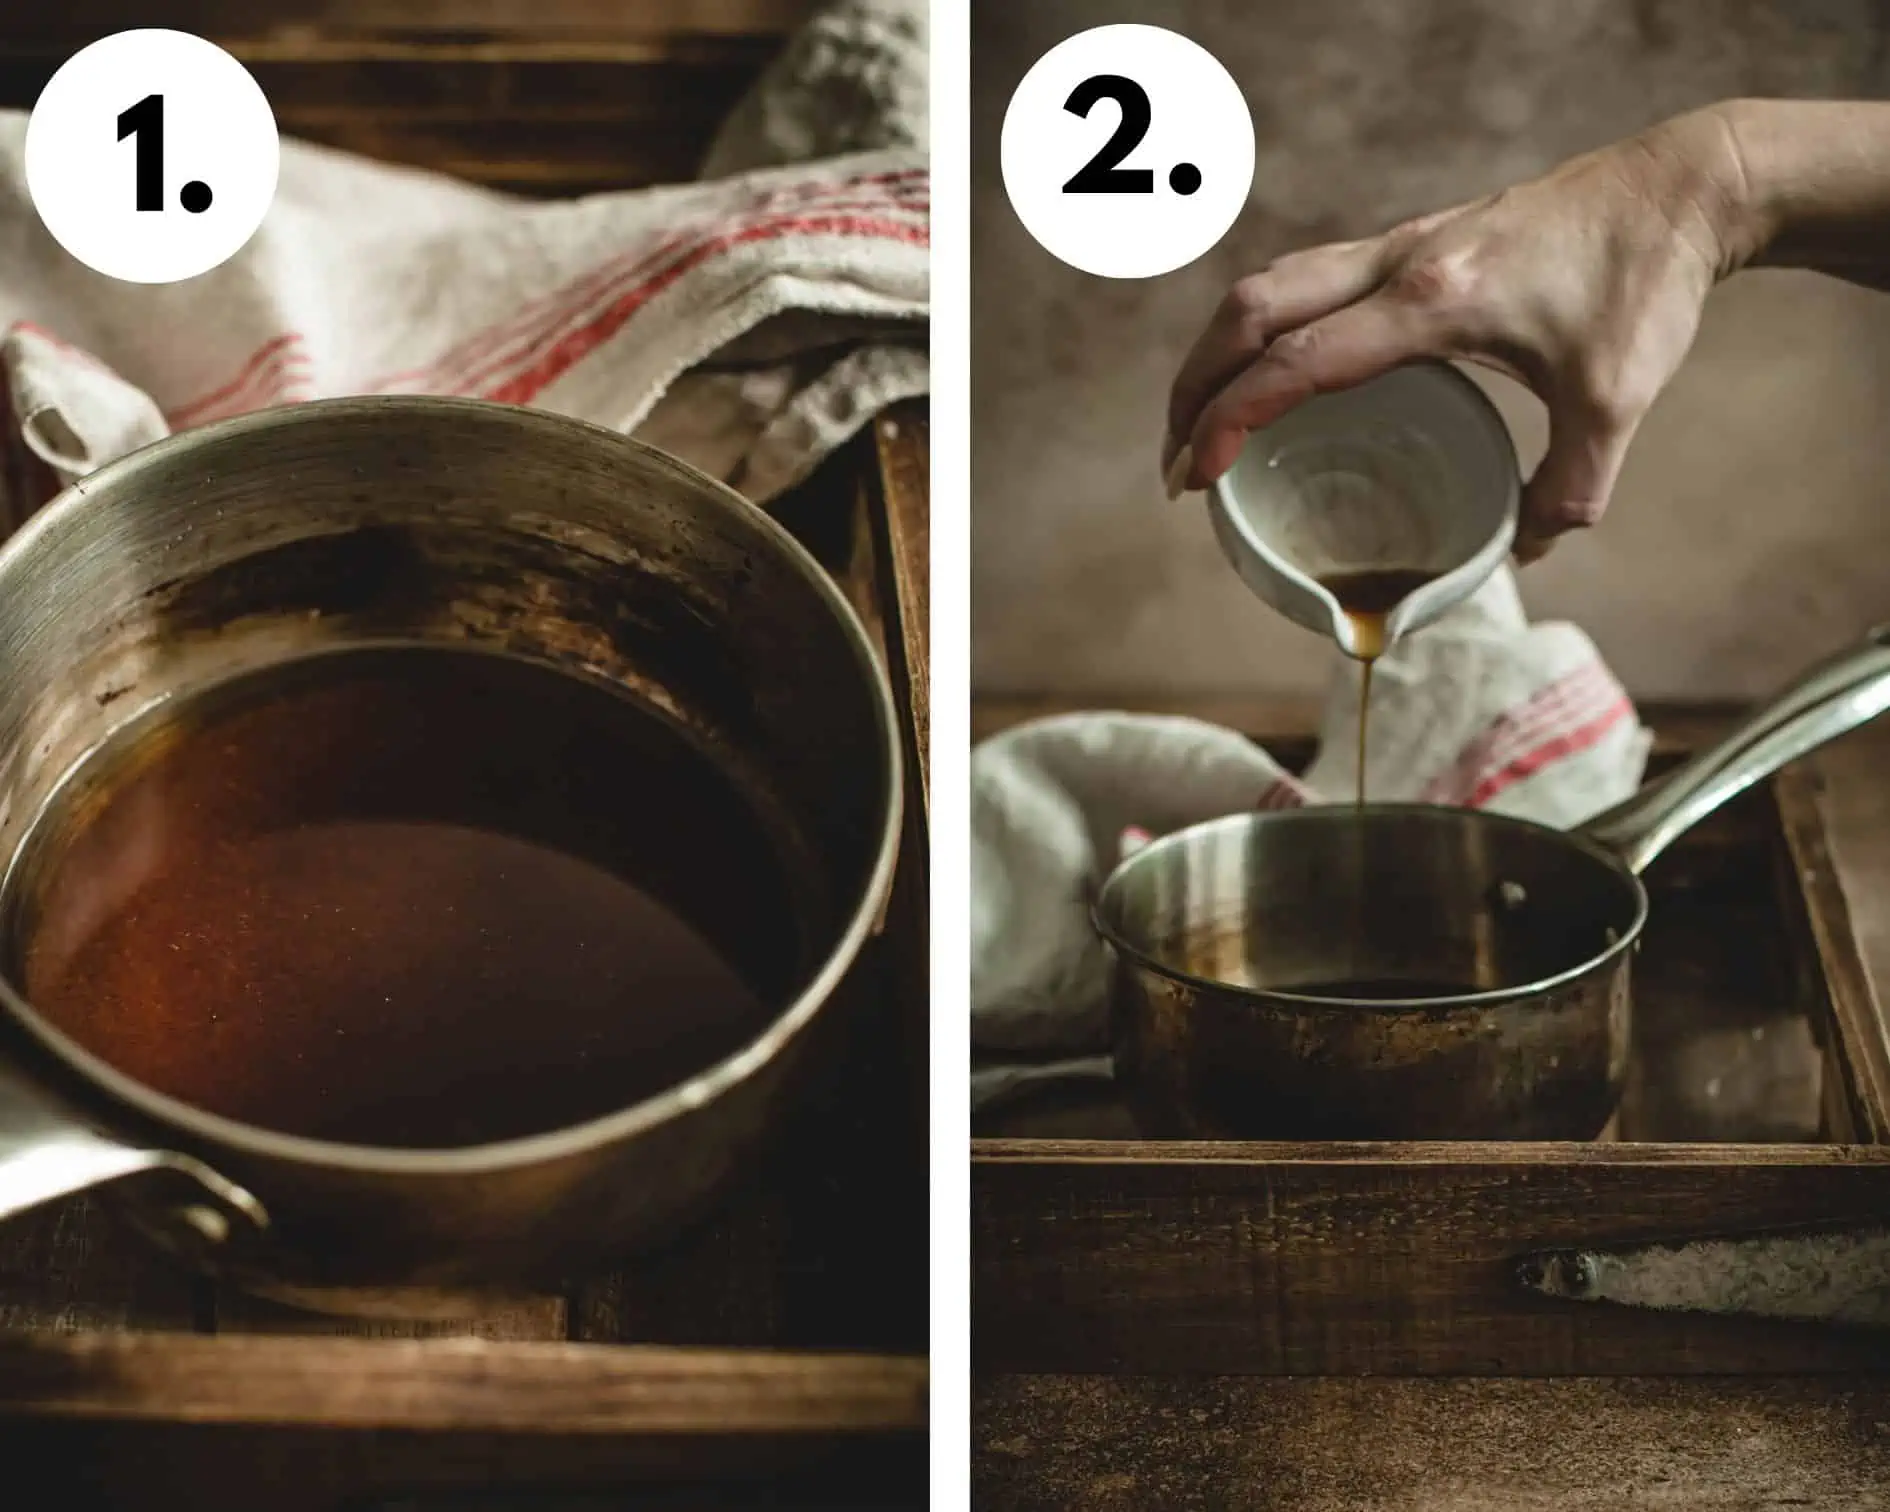 How to make vanilla simple syrup steps 1 and 2.